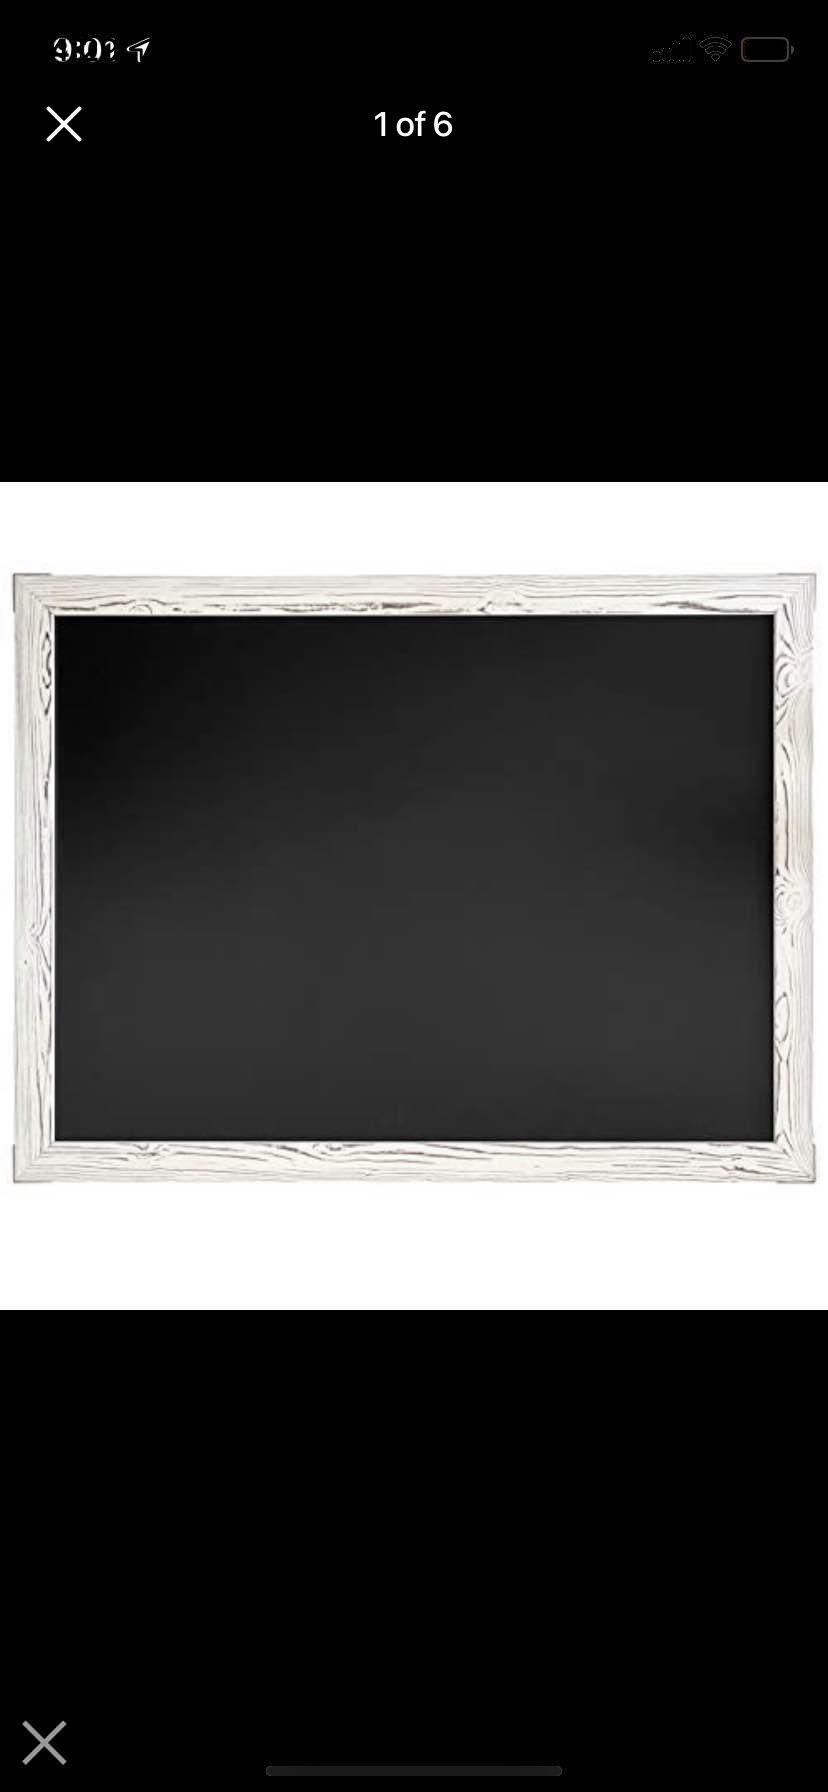 Chalkboard - Easy-to-Erase Large Chalkboard for Wall Decor and Kitchen - Hanging Black Chalkboards (46x34.5, White Rustic Frame)